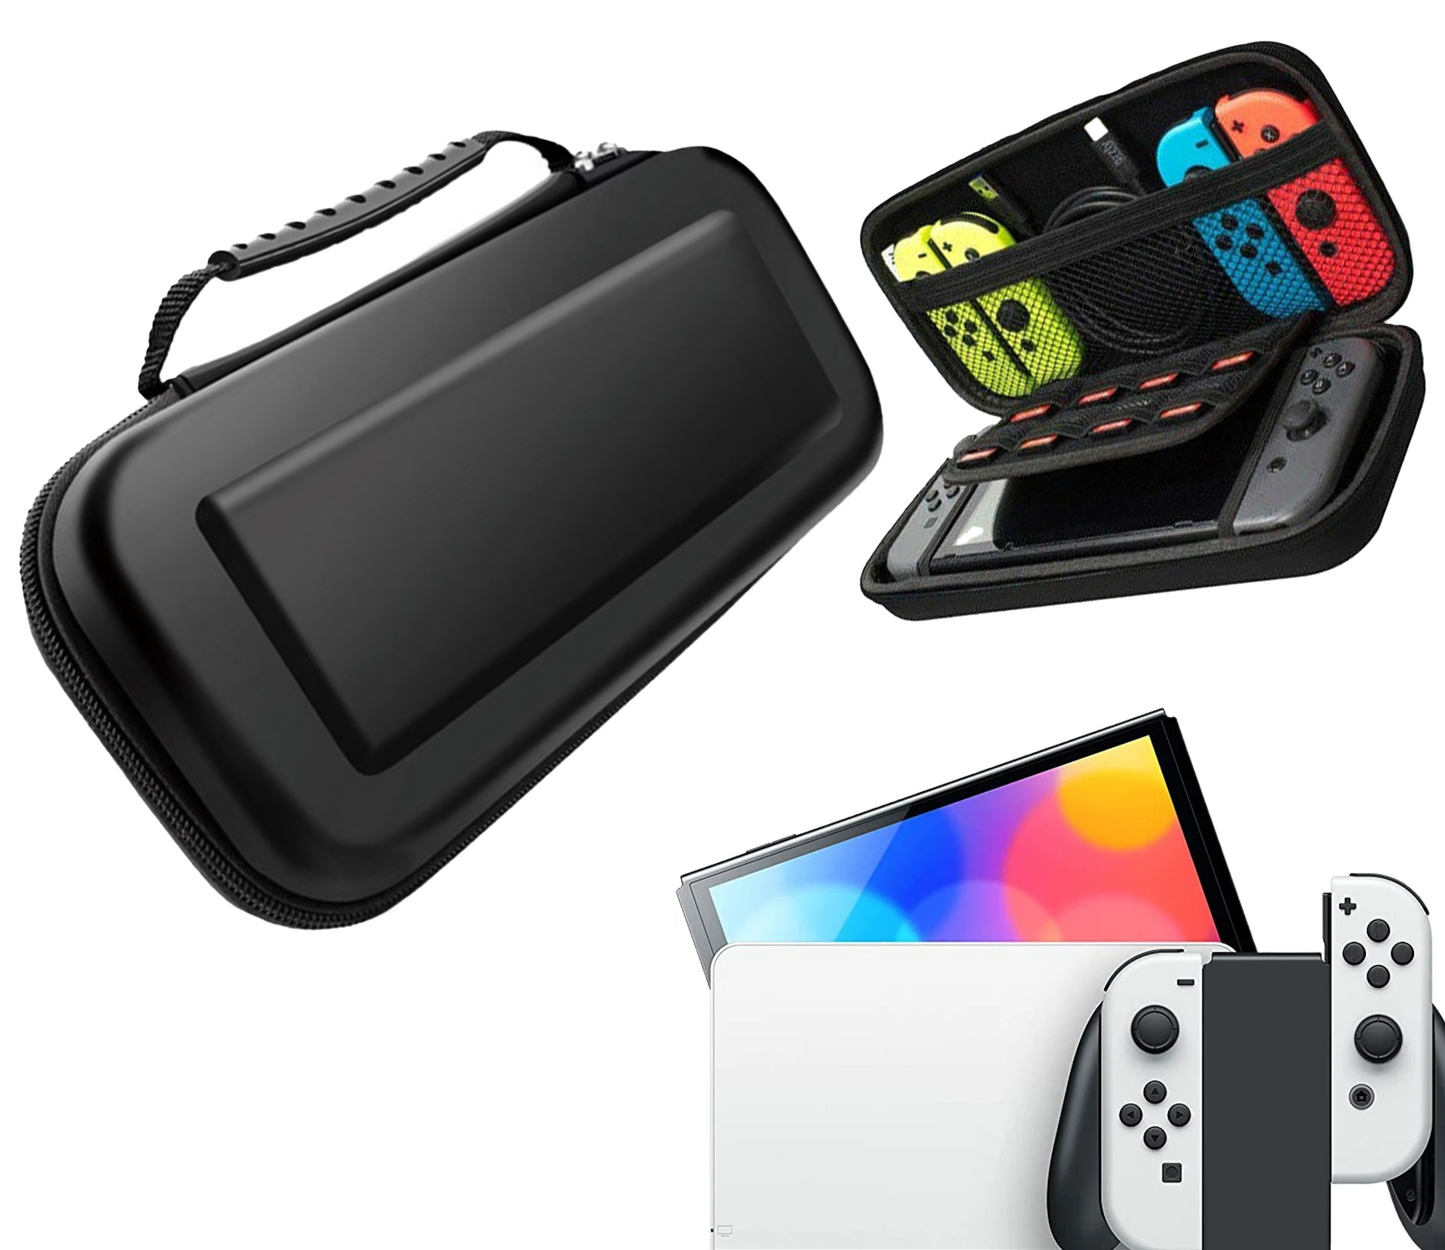 Protective cover | Hardcase Storage Cover | Case | Black | Accessories suitable for Nintendo Switch